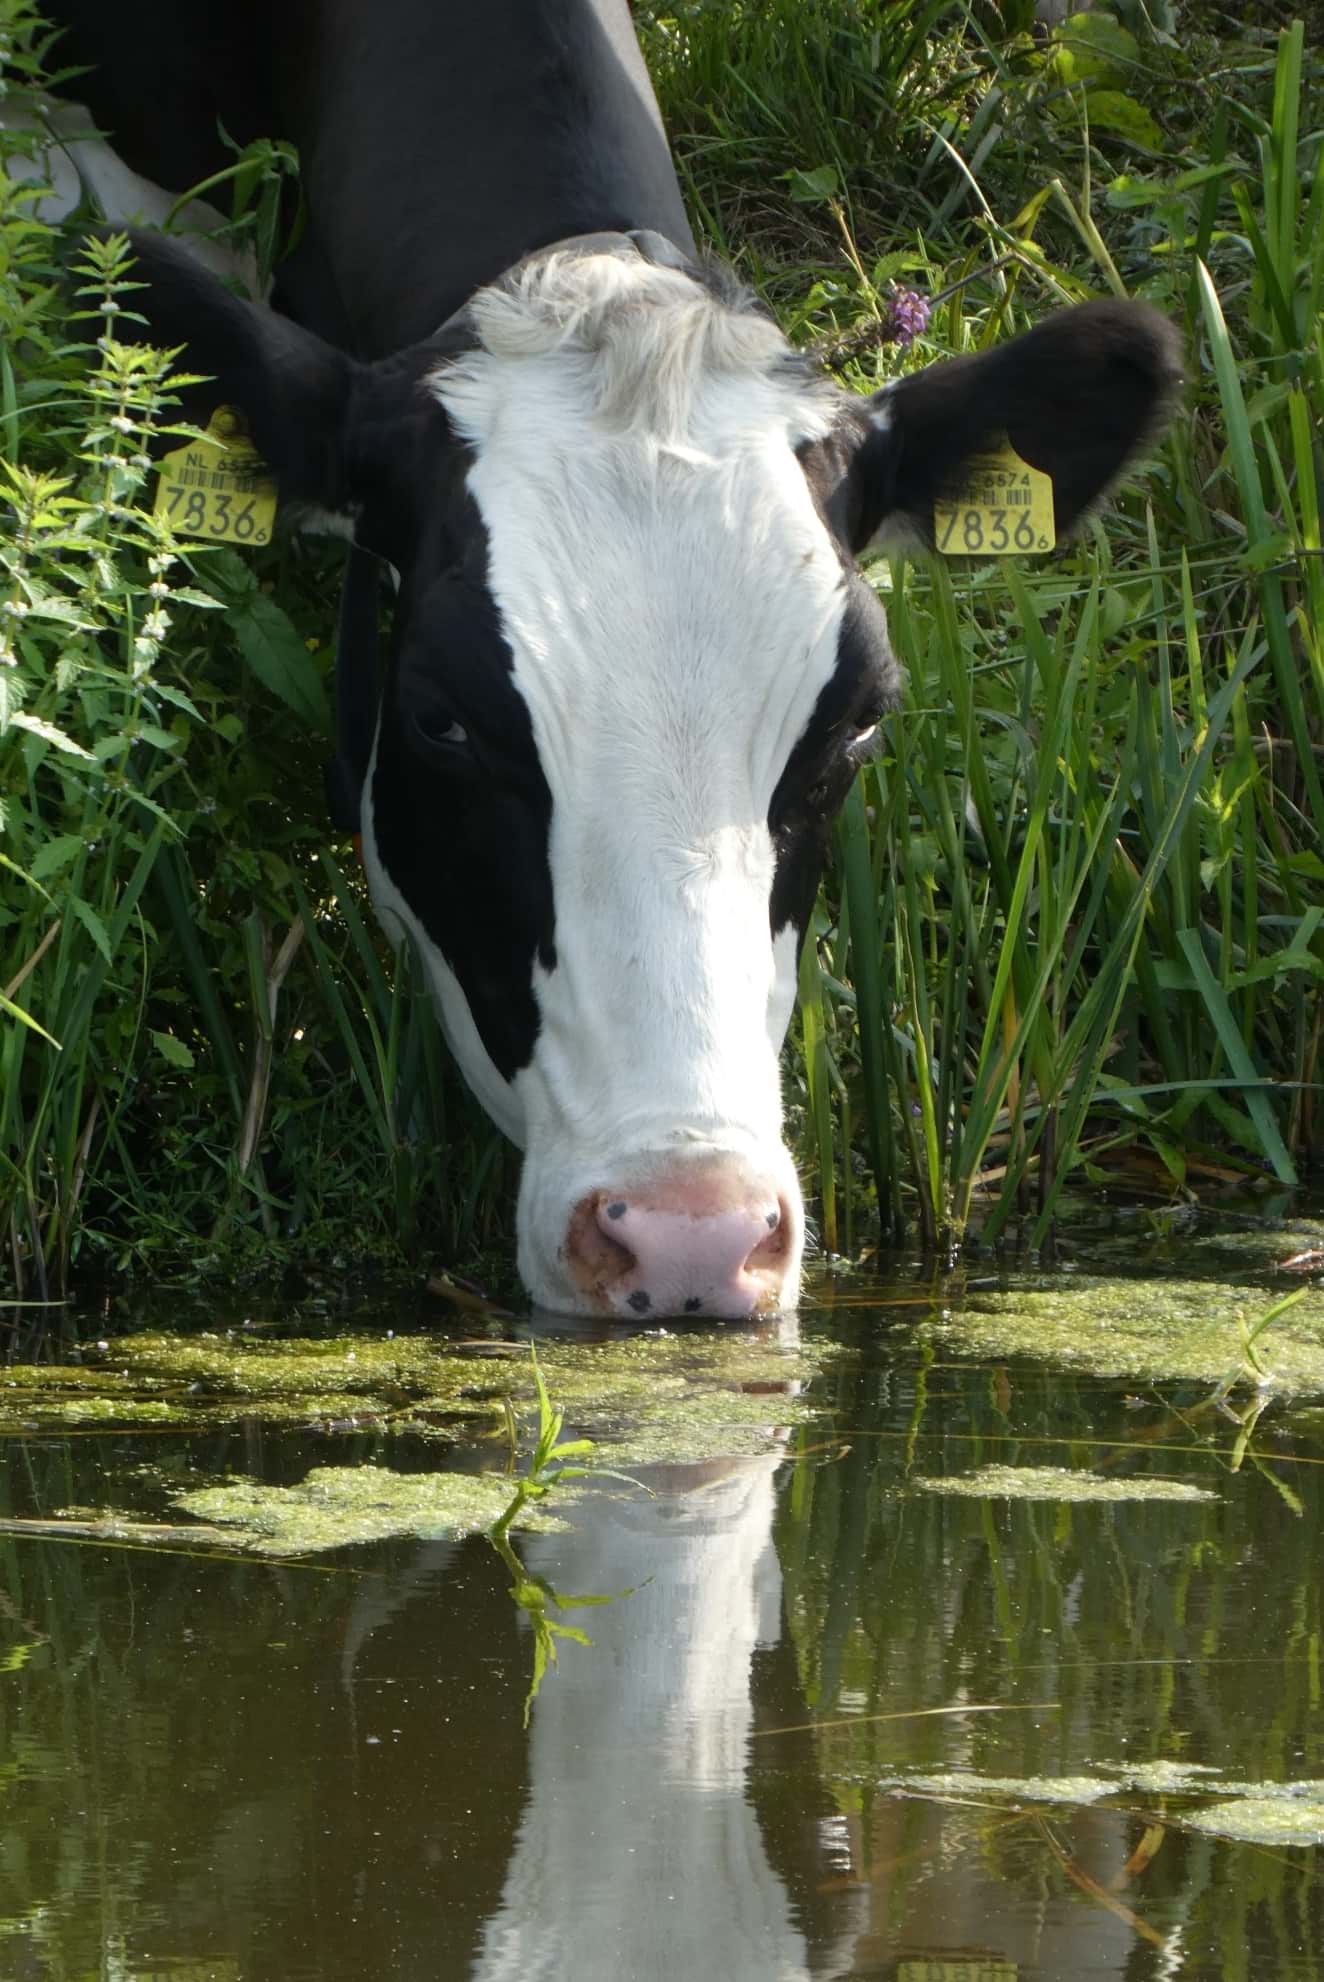 The average cow drinks almost one whole bathtub of water in a day.